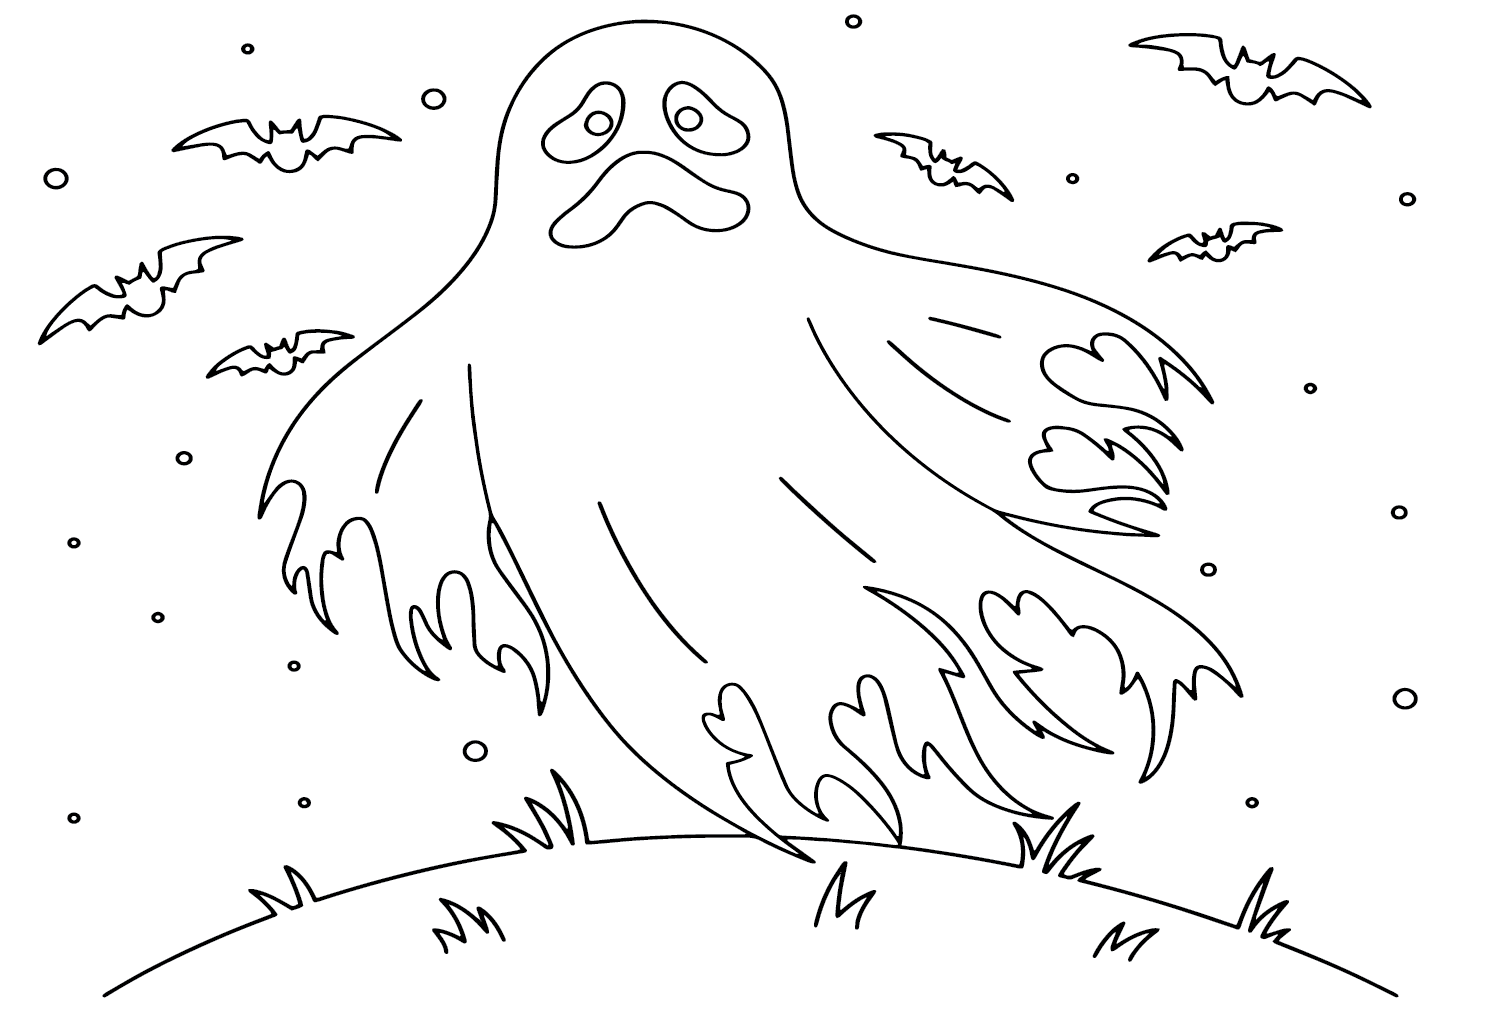 Coloring Page of a Ghost from Spooktacular Halloween